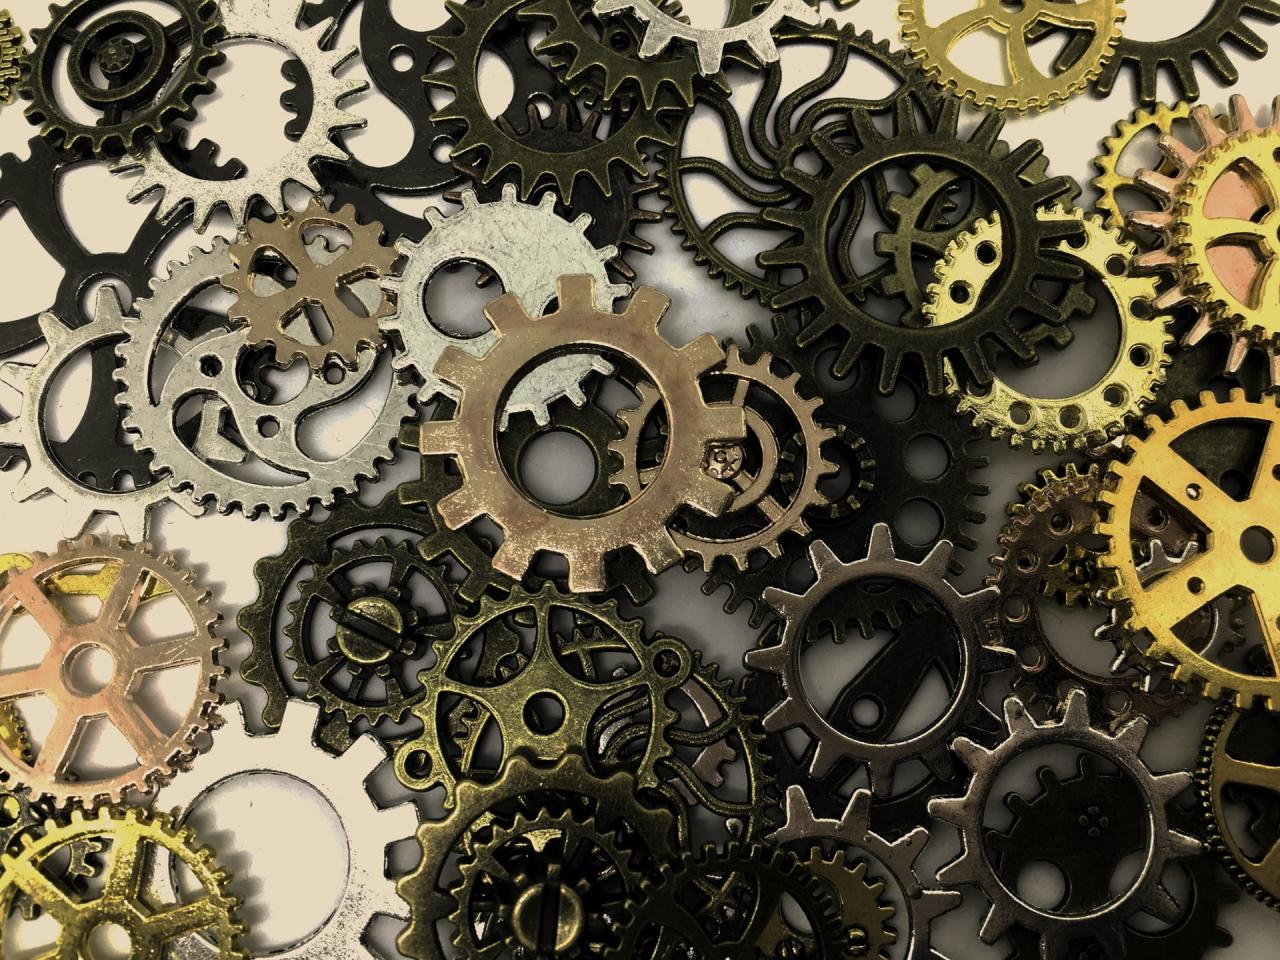 A pile of gears that are black, silver, and gold